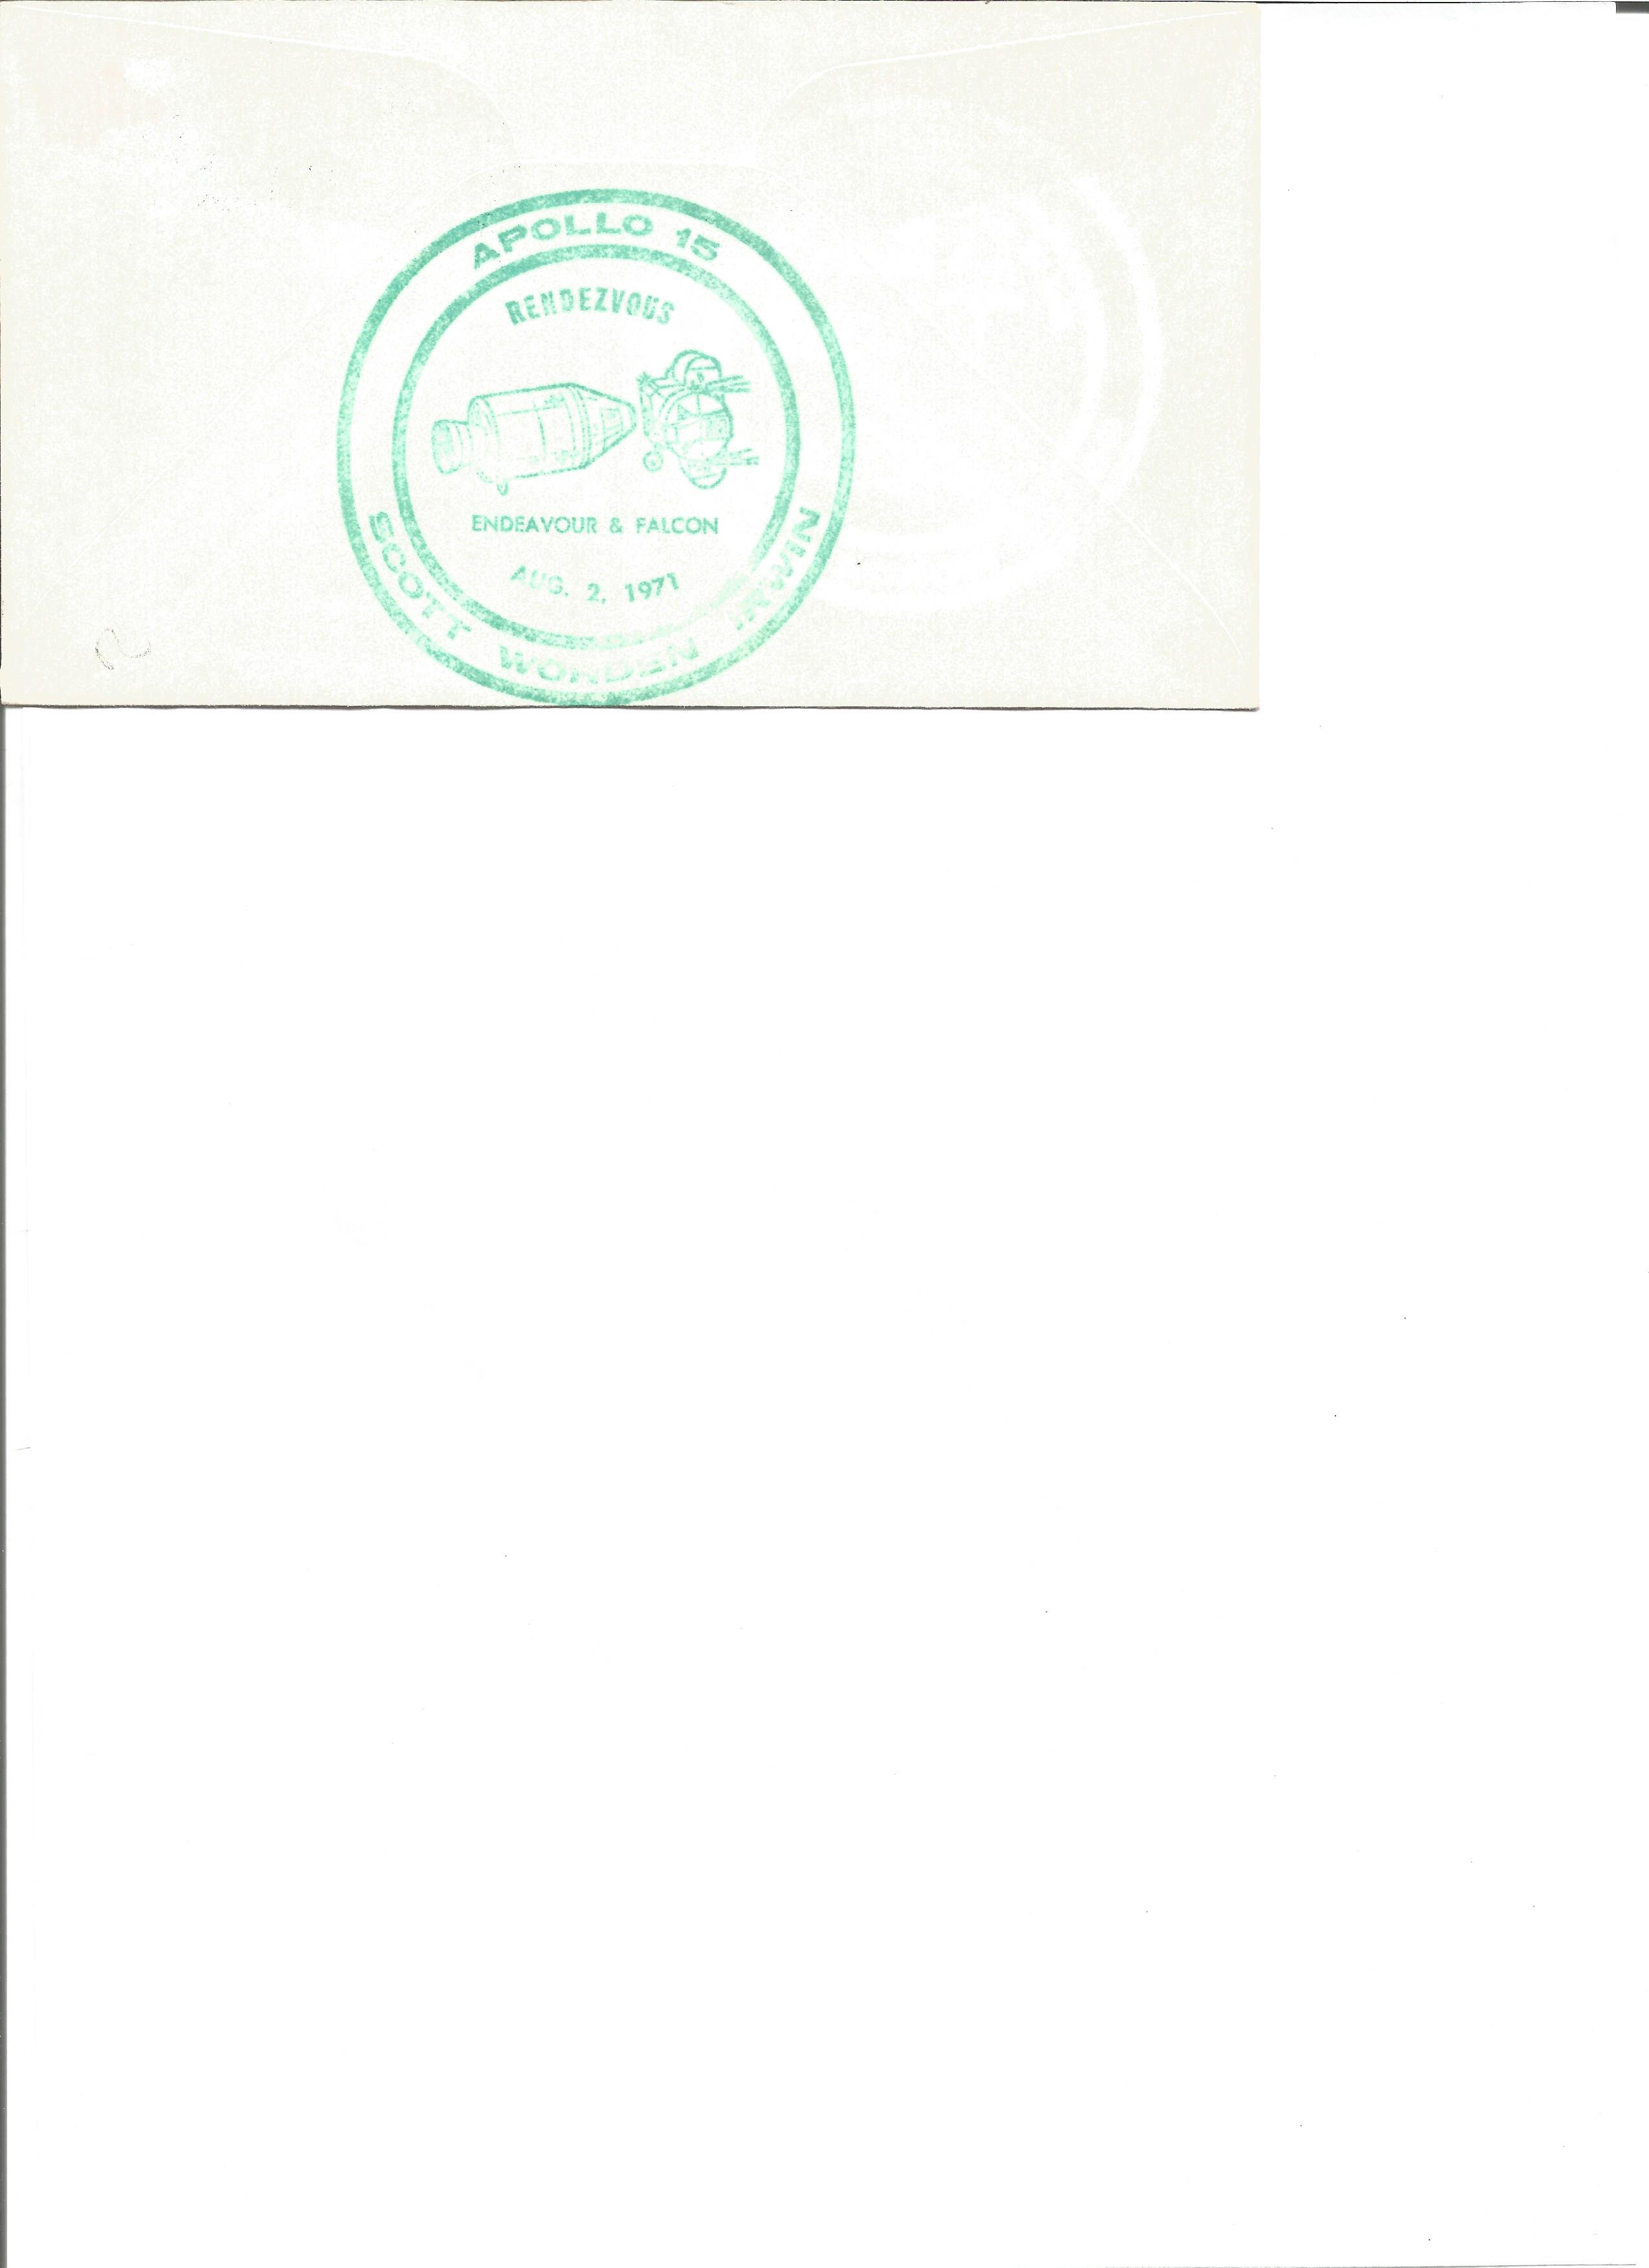 Space Apollo 15 astronauts Moonwalker Jim Irwin and Col Al Worden signed 1971 Apollo 15 US FDC, with - Image 2 of 2